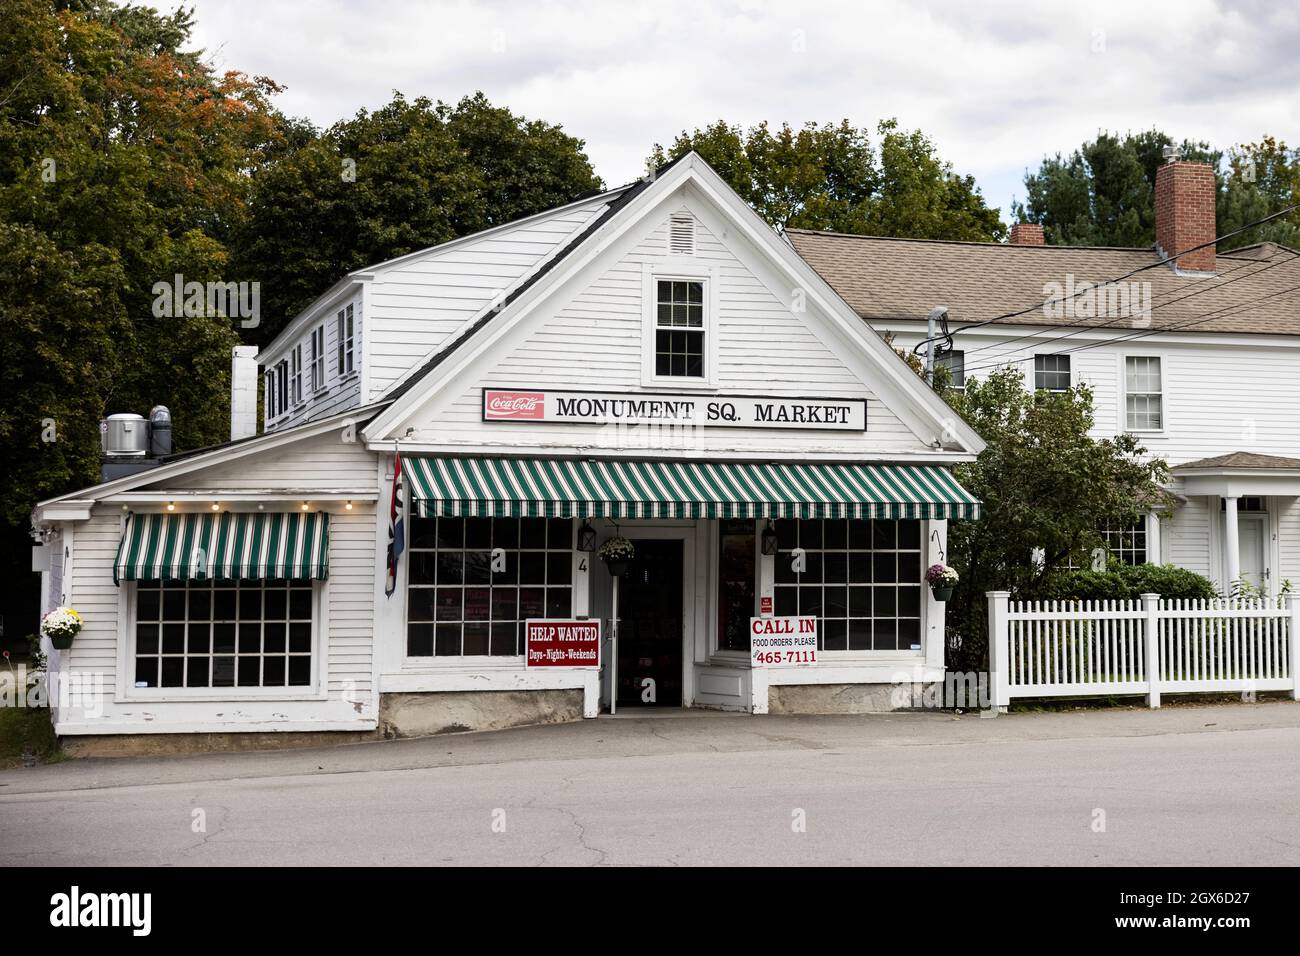 The Monument Square Market in the town center of Hollis, New Hampshire, USA. Stock Photo